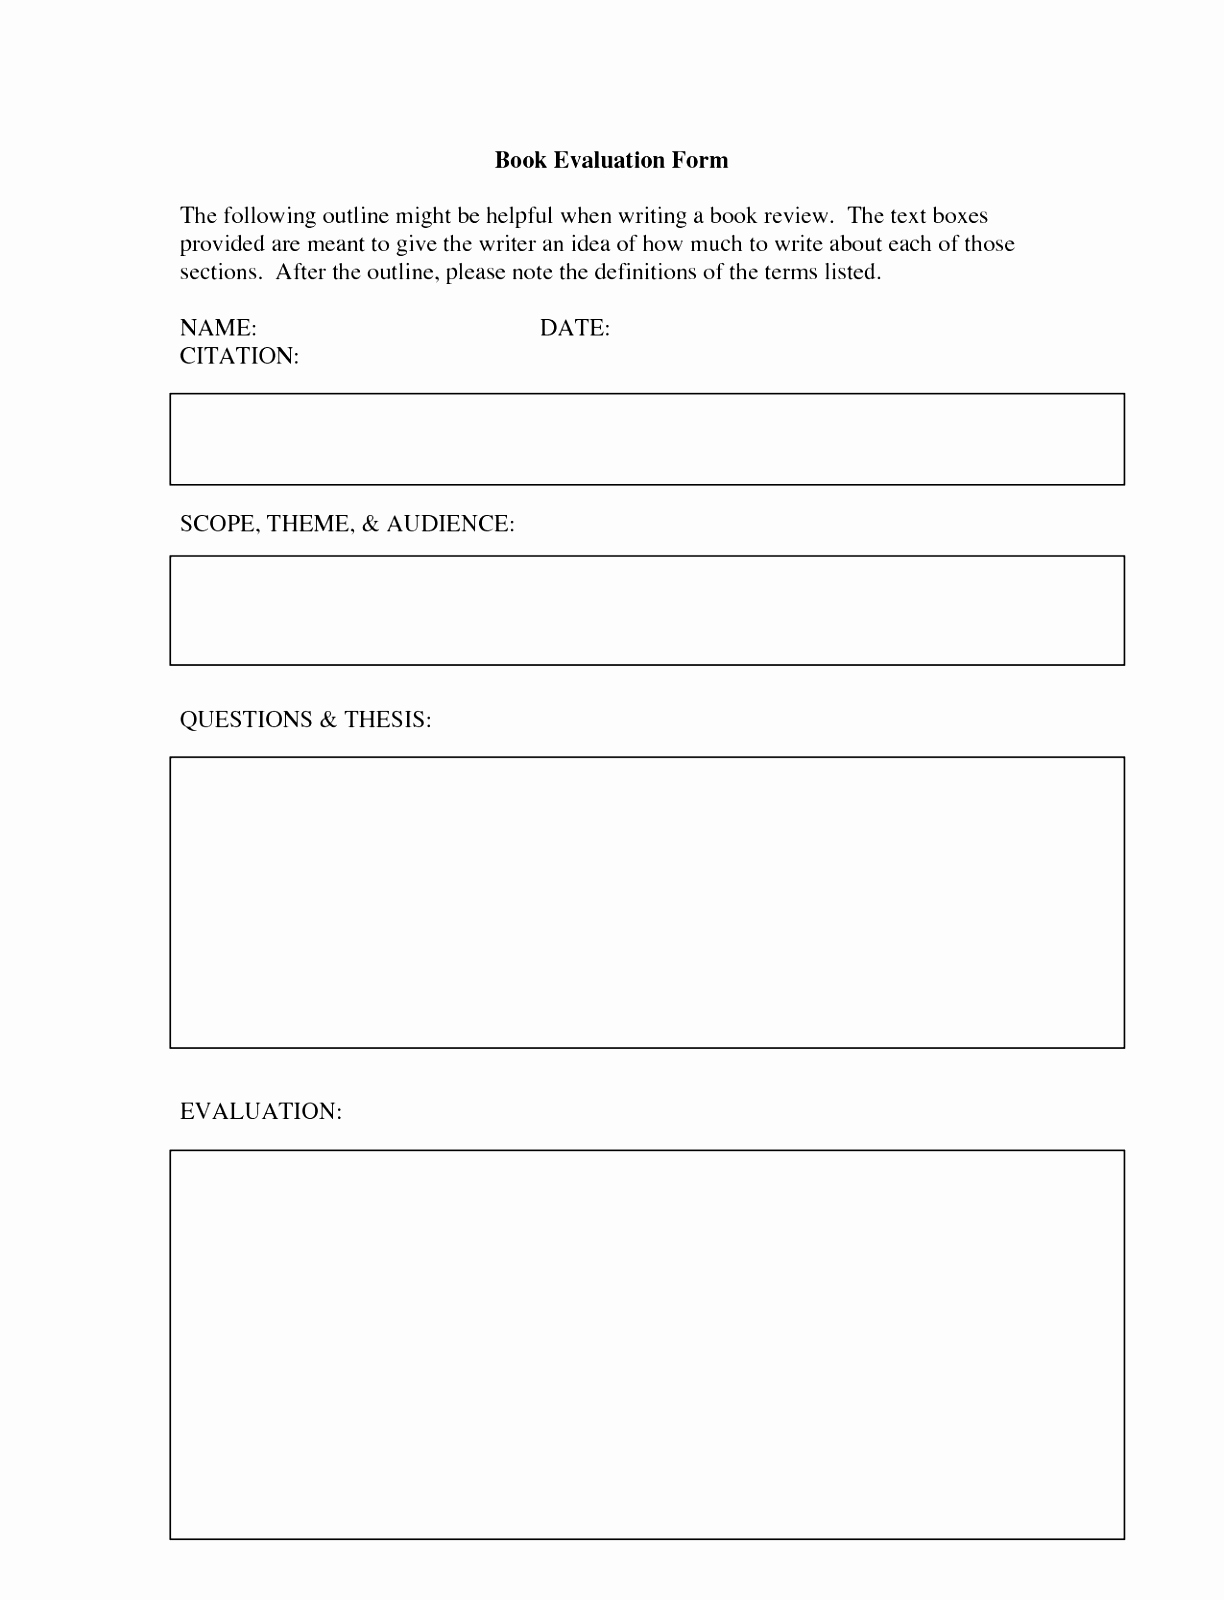 Book Writing Templates Microsoft Word Best Of 12 Write A Book Template Microsoft Word Oyeir